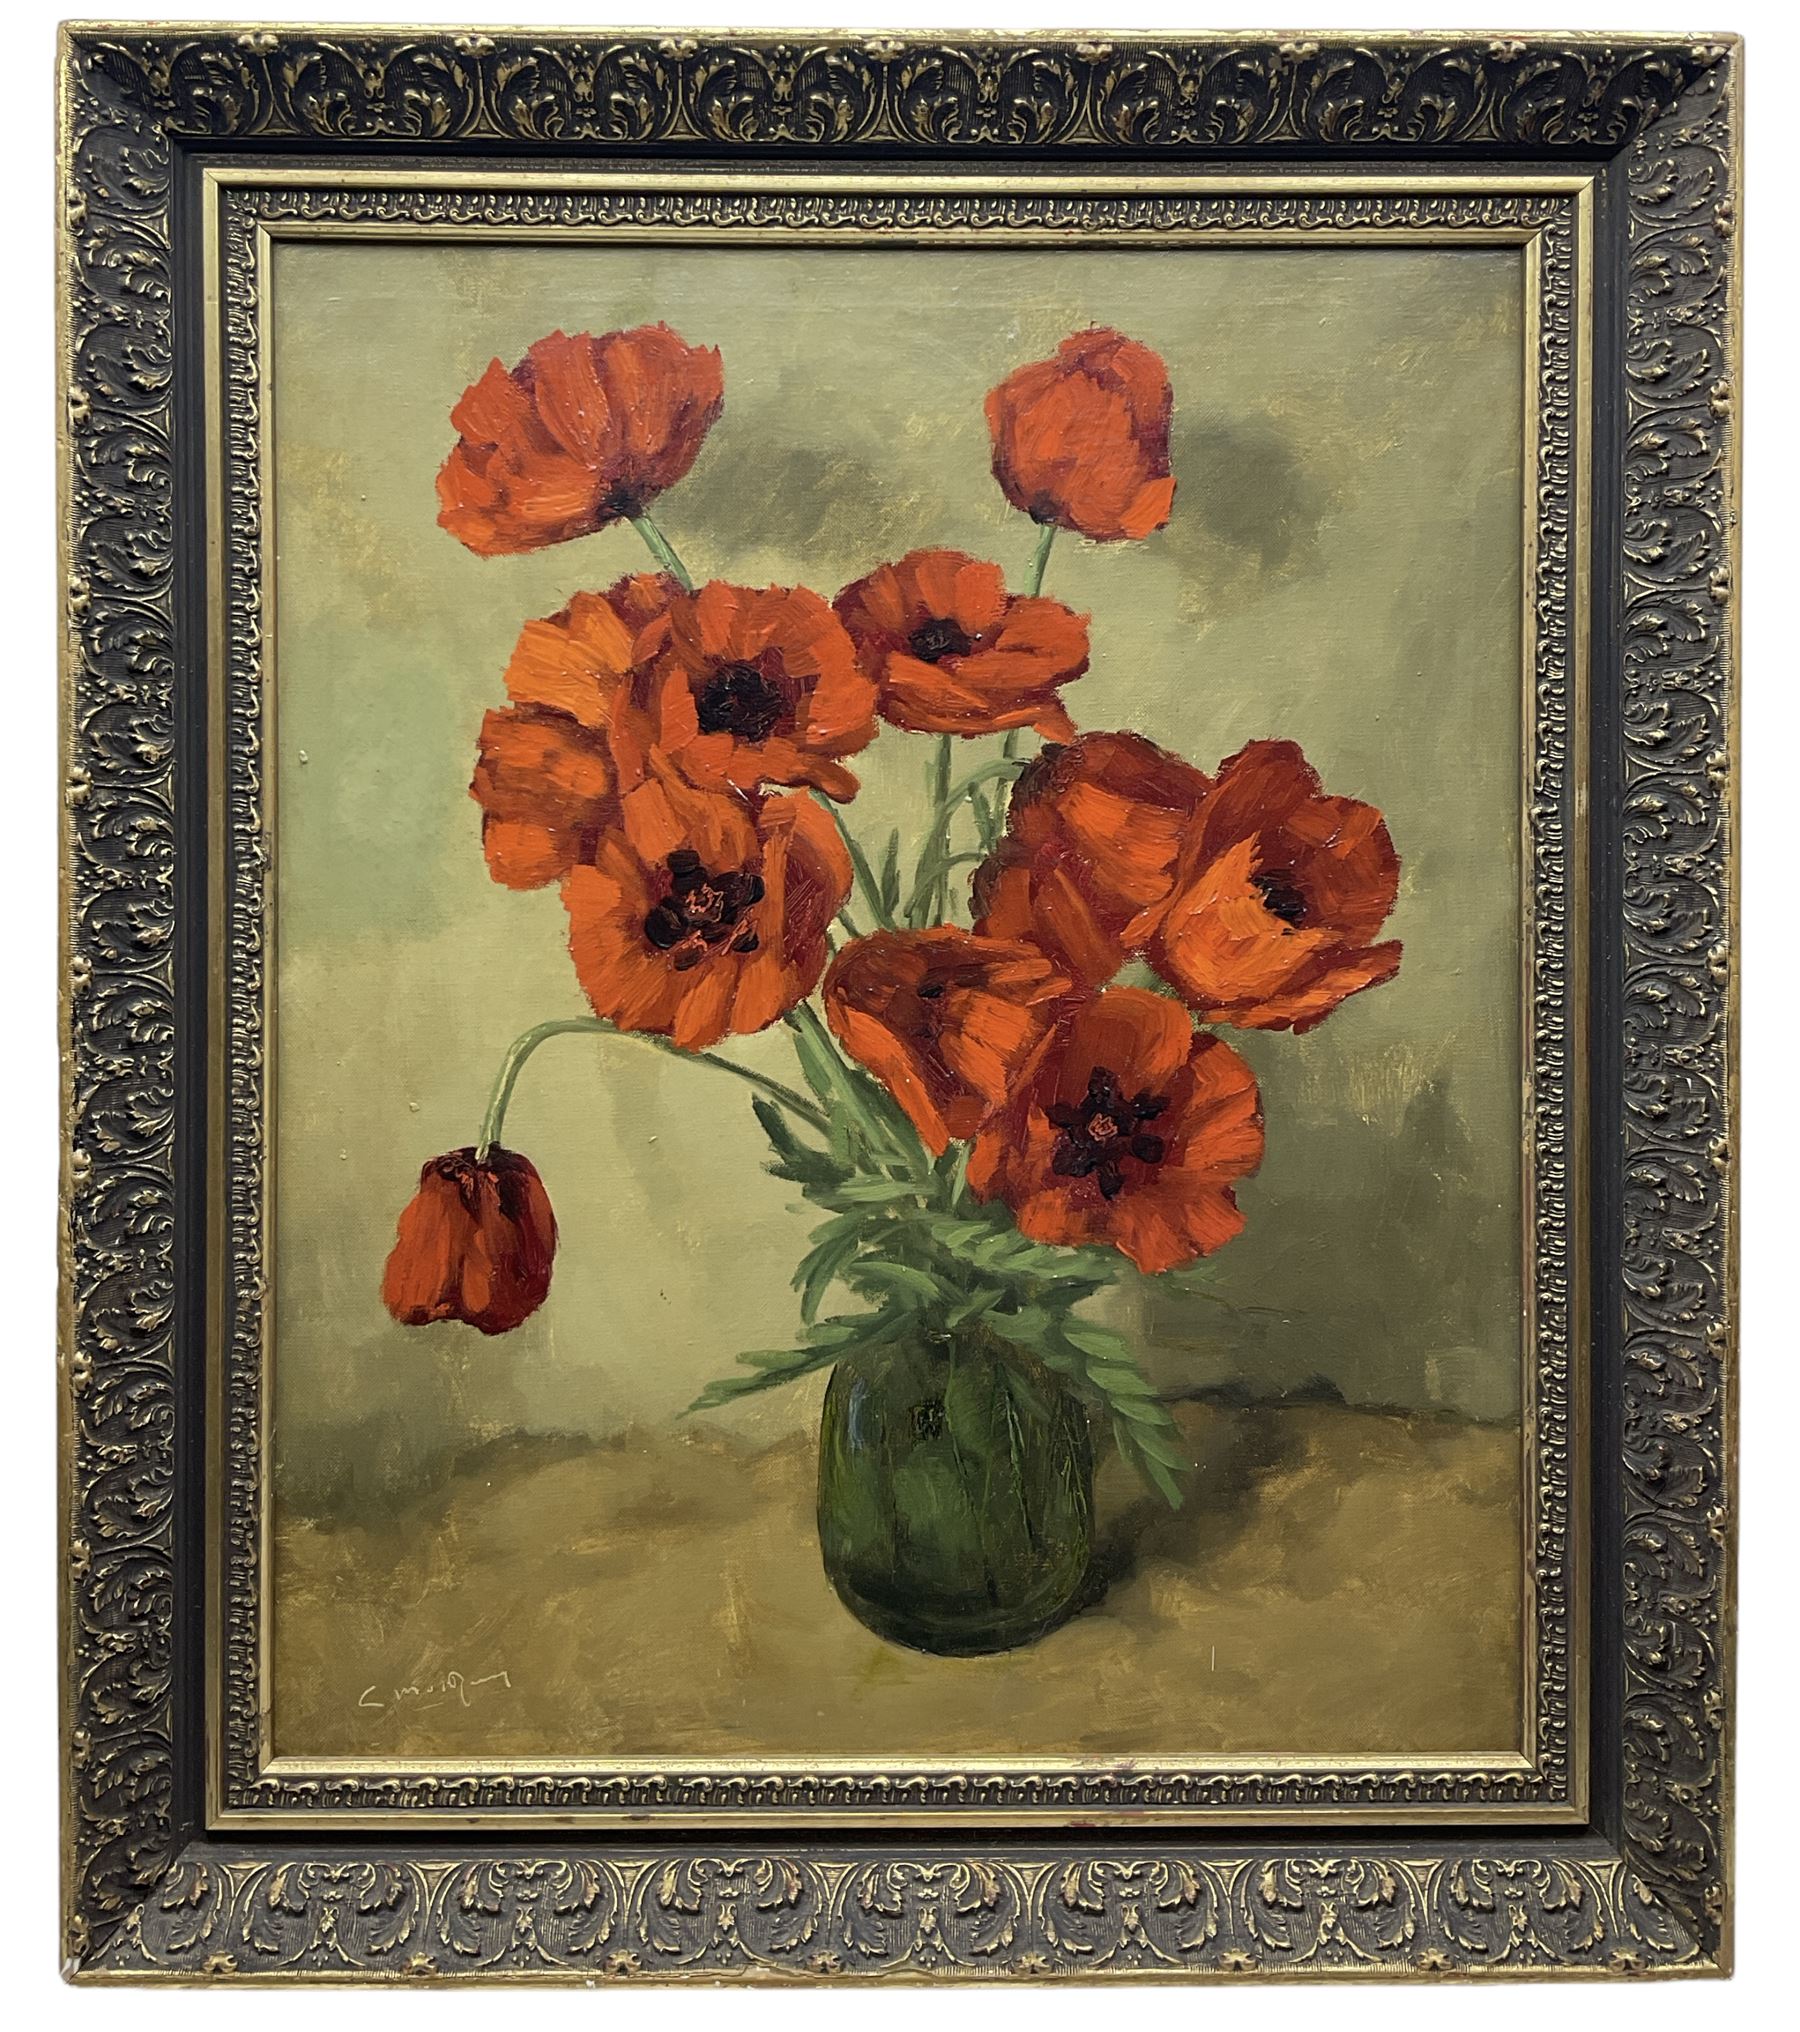 C M Van Rooy (Dutch 20th century): Still Life of Poppies in a Vase - Image 2 of 2